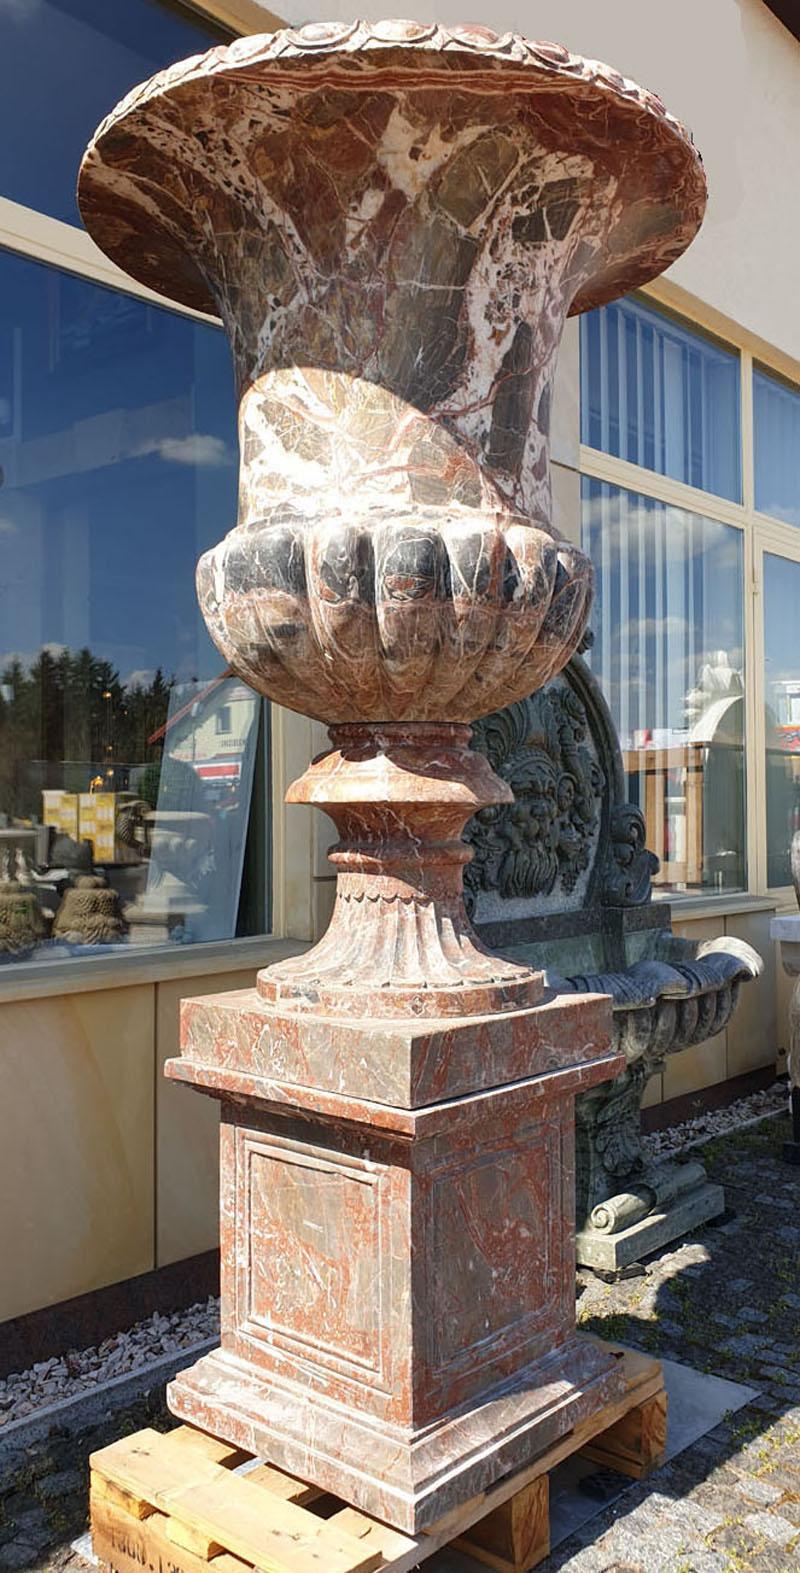 Pair of multicolored marble jardinières almost 2 meters high - Contemporary Replica
A pair of beautiful, classicist jardinières, made entirely of multicolored marble, with meticulous attention to historical details that have been recreated down to